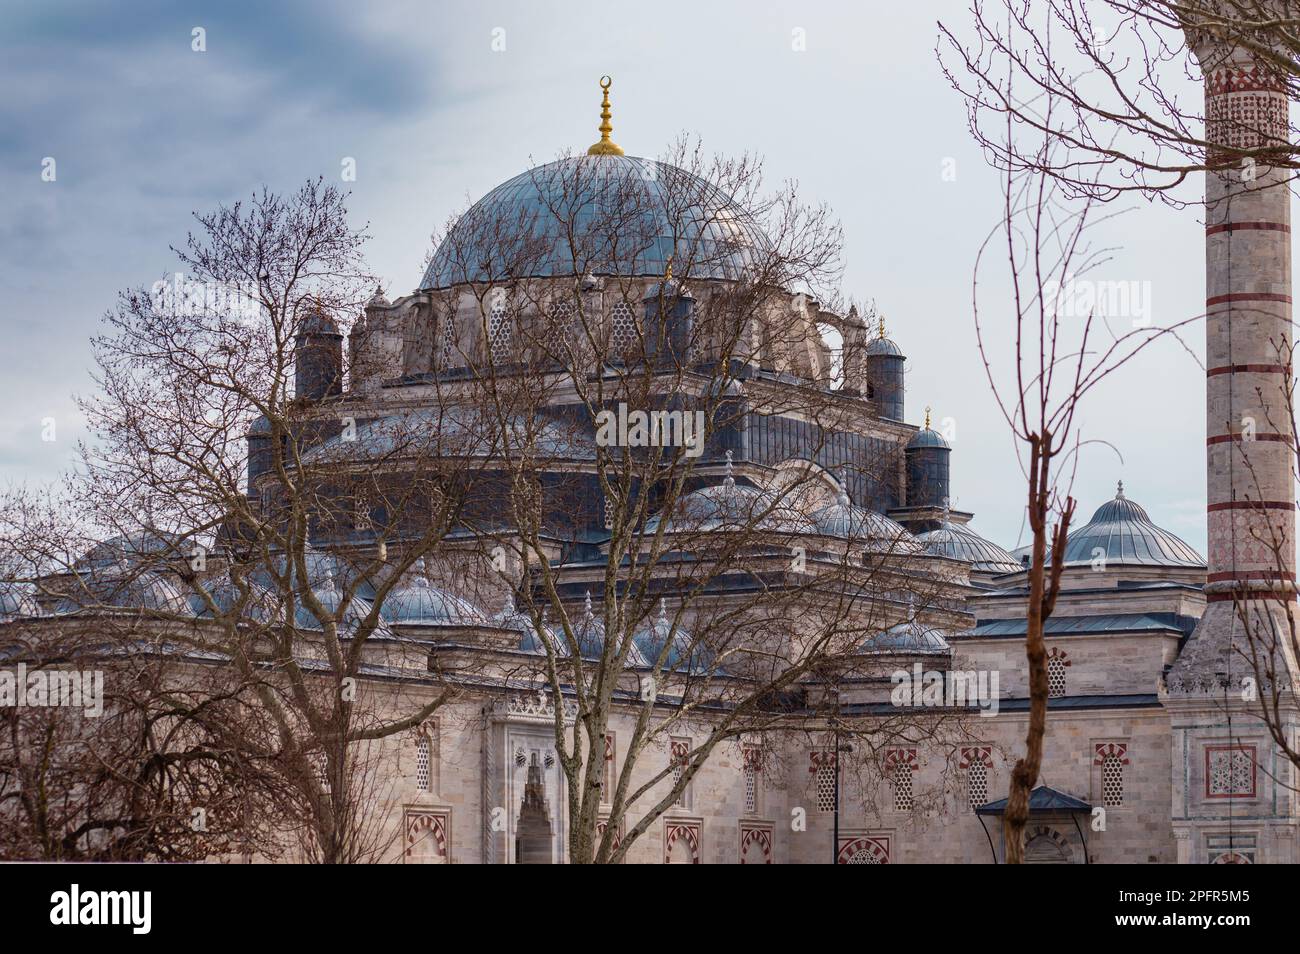 A view of the Beyazit mosque in the city of Istanbul. It is a building among the early works of Ottoman classical period architecture 16th century. Stock Photo